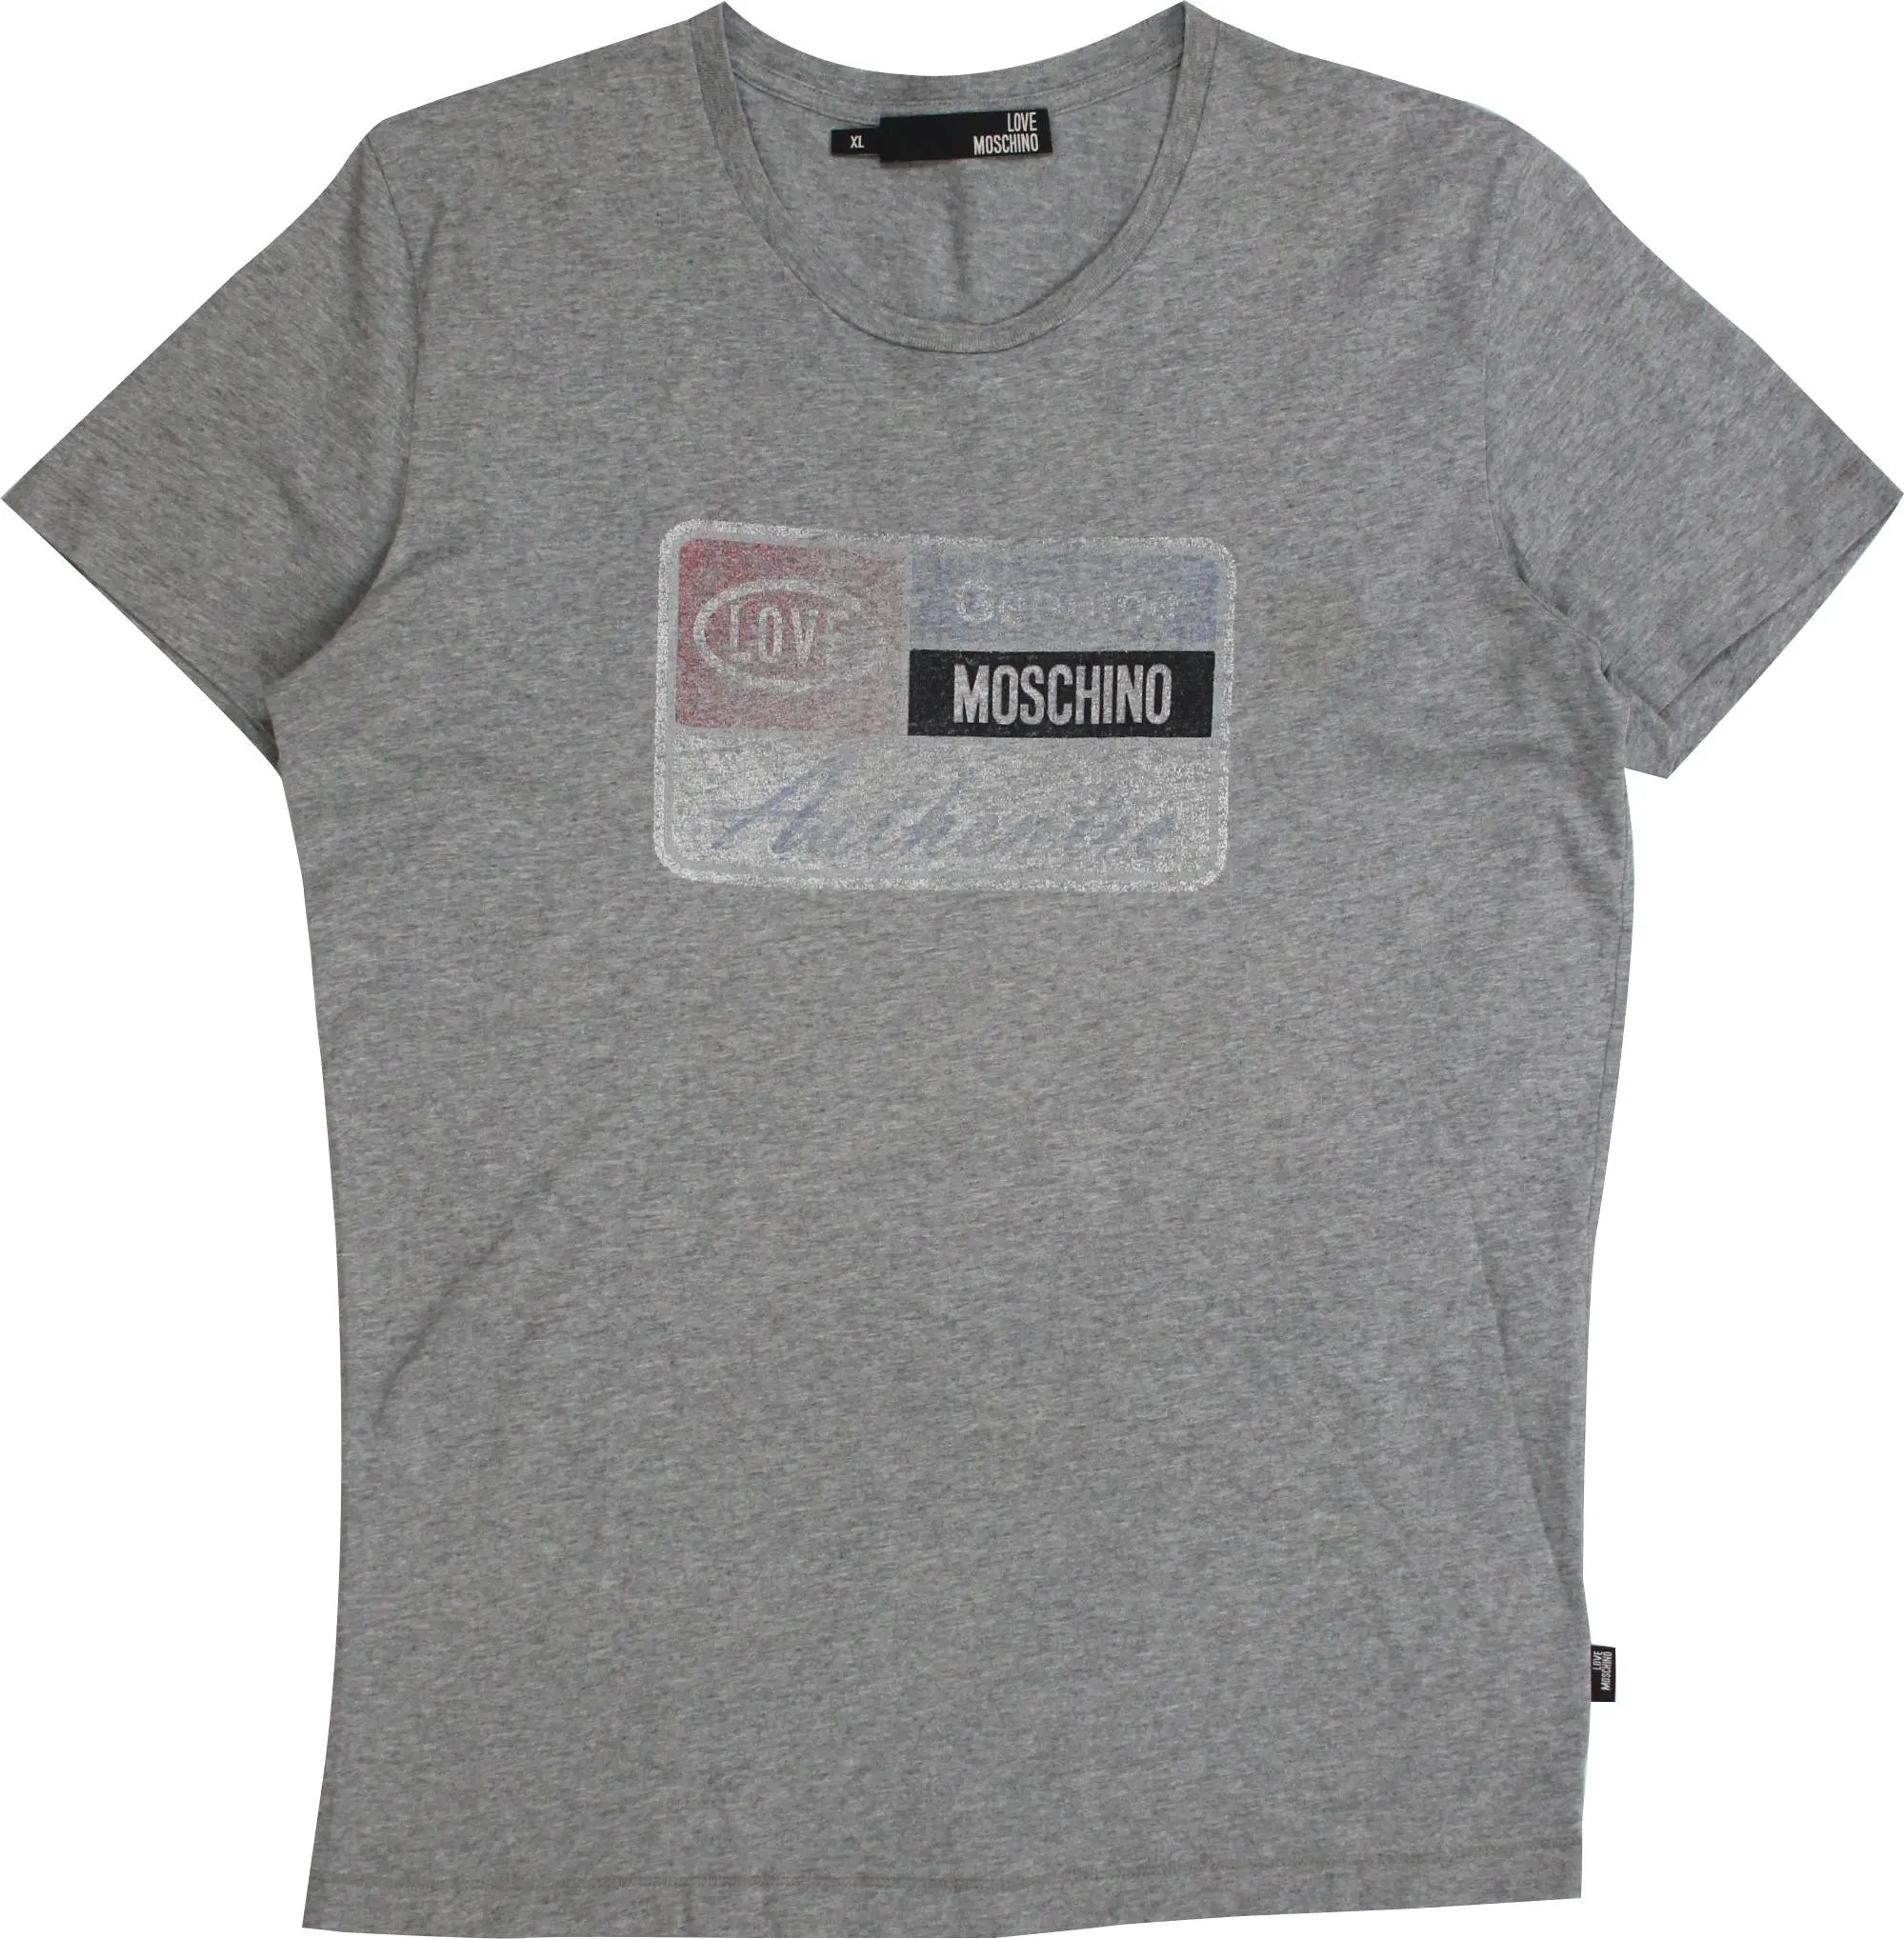 Moschino - Grey T-shirt by Moschino- ThriftTale.com - Vintage and second handclothing